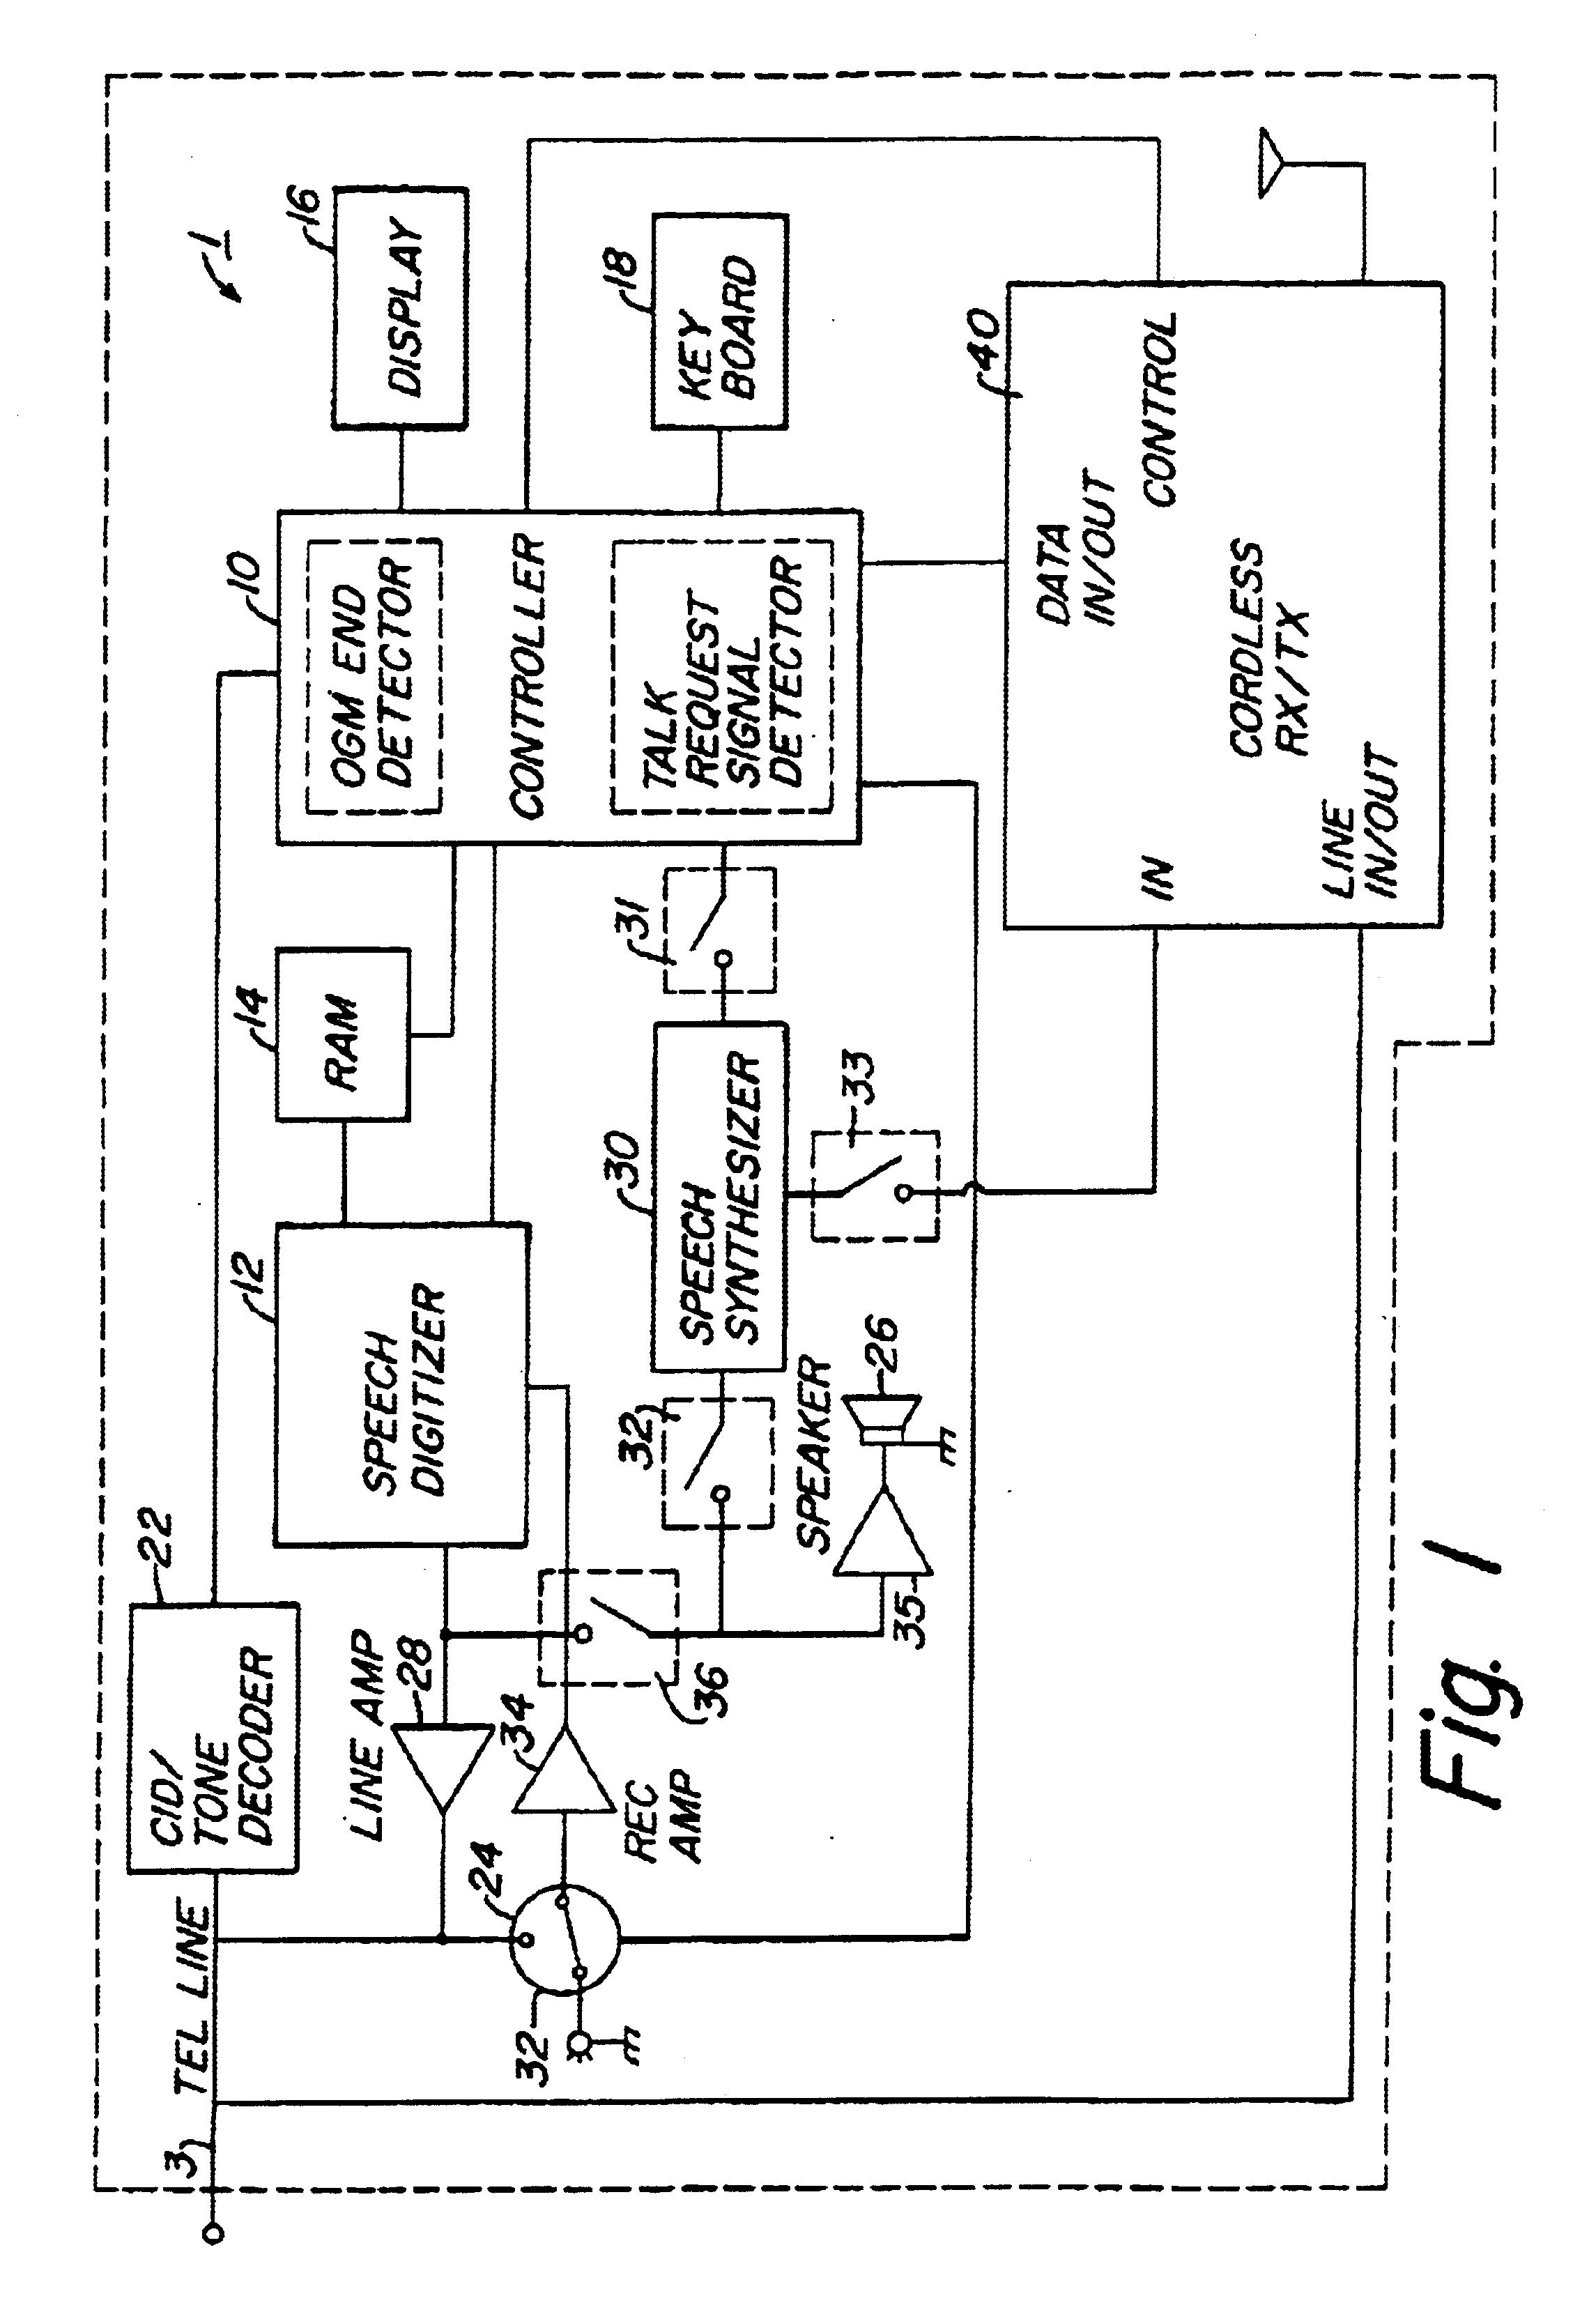 Method and apparatus for an improved call interrupt feature in a cordless telephone answering device